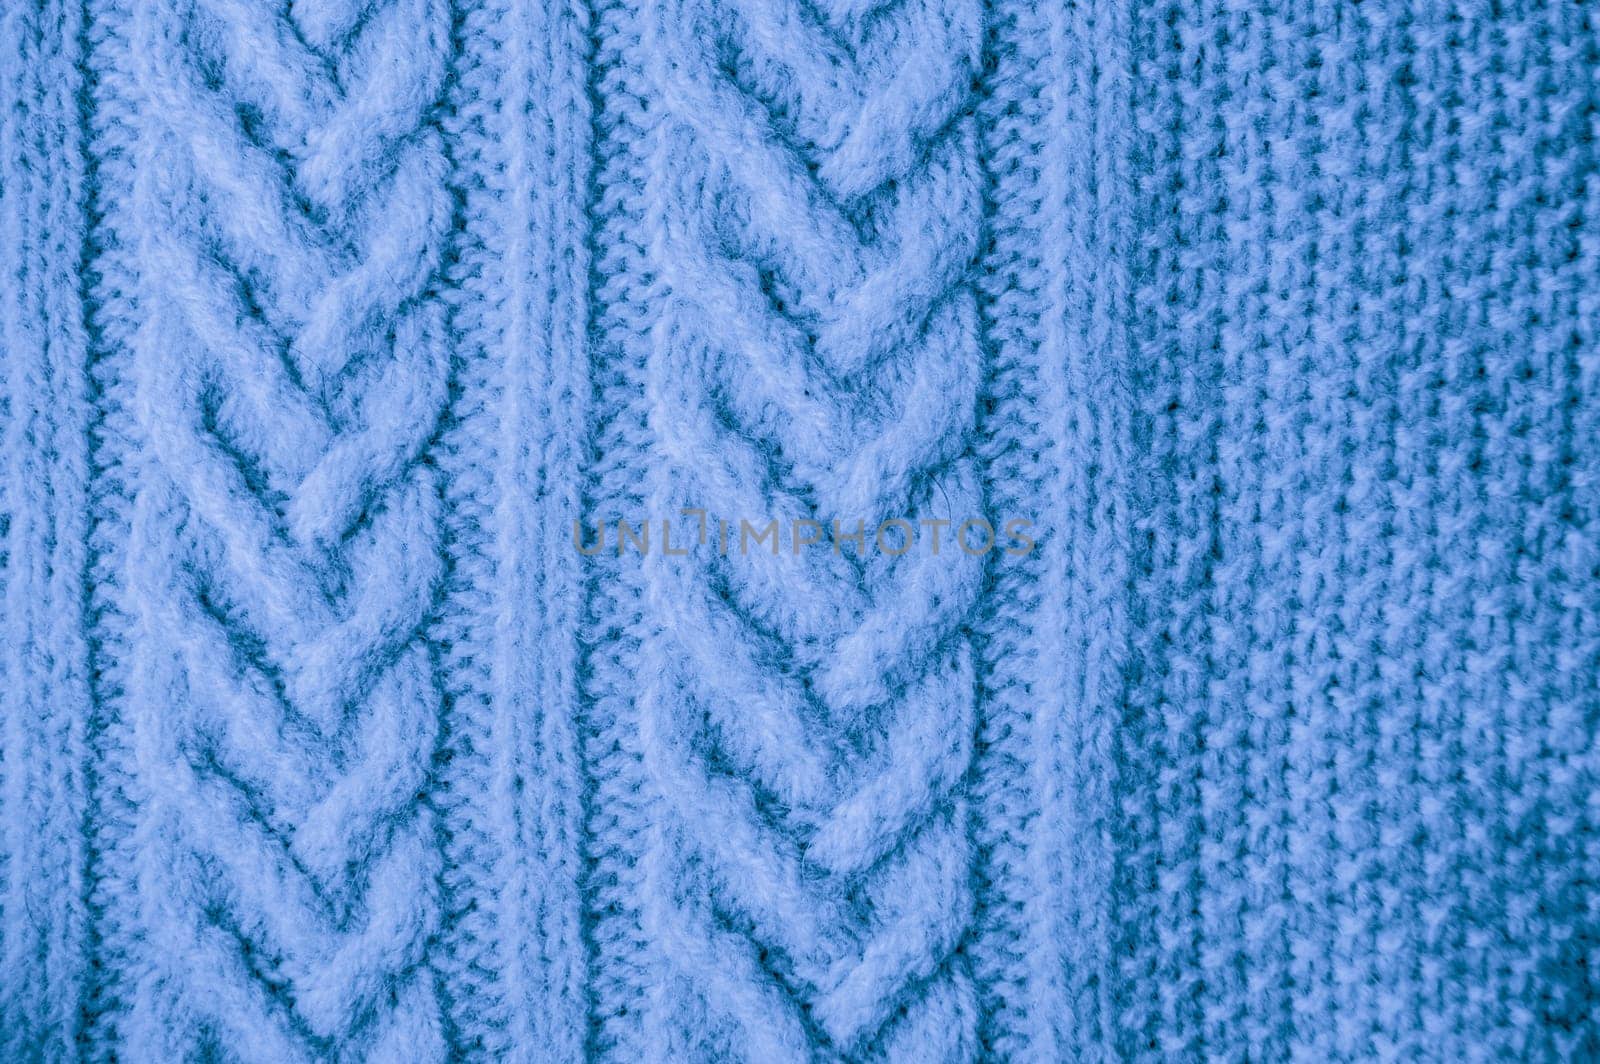 Detail Knitted Sweater. Abstract Wool Pattern. Knitwear Xmas Background. Soft Knitted Blanket. Blue Linen Thread. Nordic Warm Yarn. Weave Print Cashmere. Knitted Sweater.